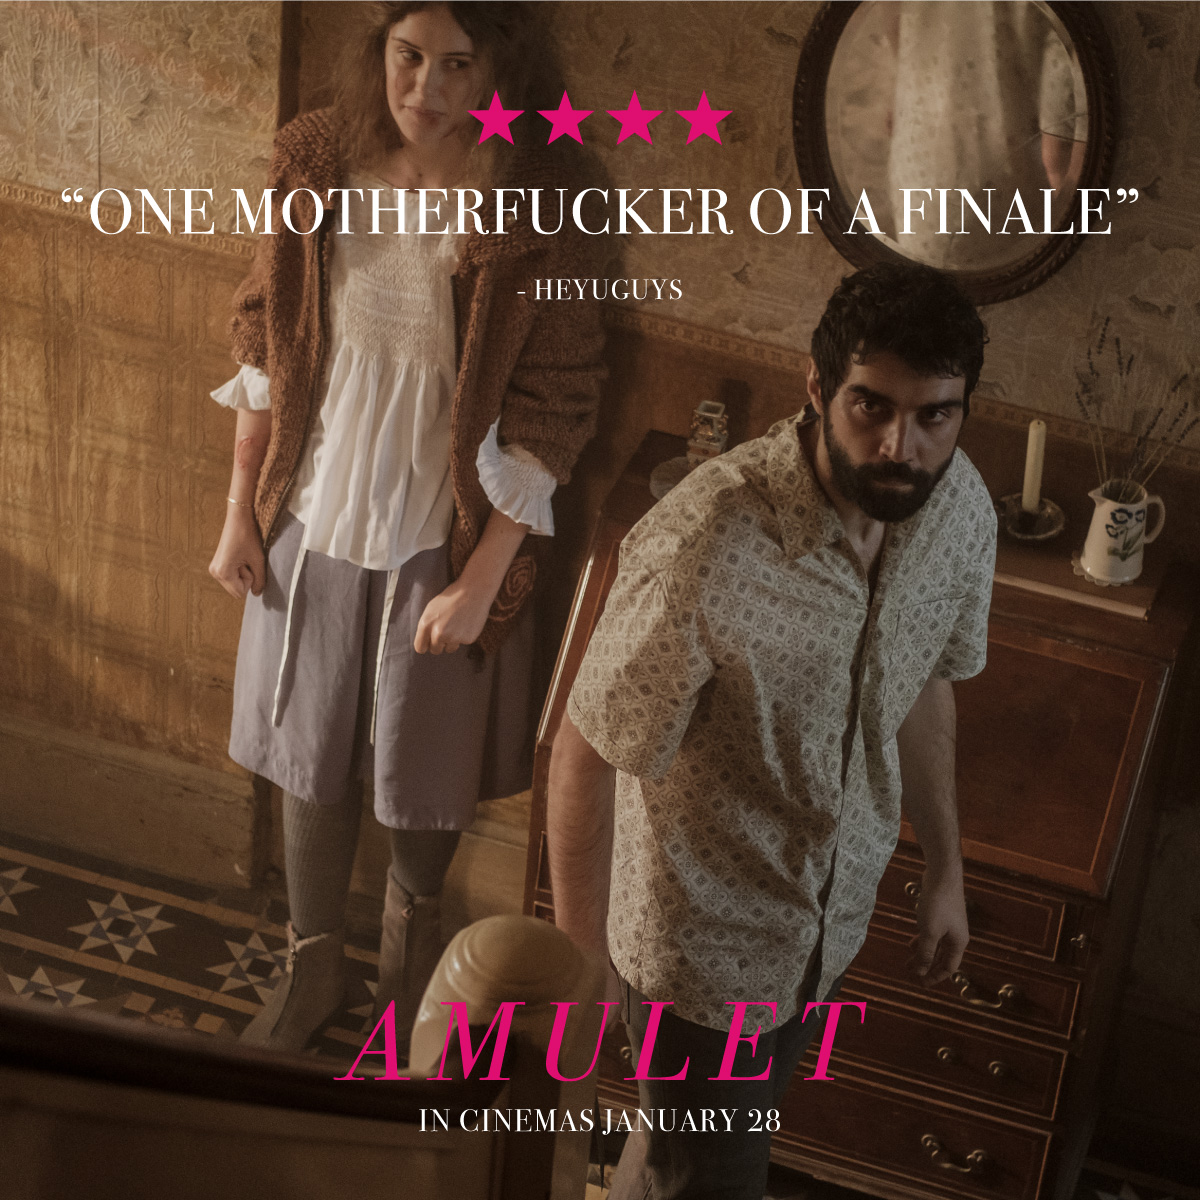 Tomorrow evening join us on the #Amulet Q&A tour at Finsbury Park Picturehouse for a special LIVE preview event with writer and director Romola Garai talking about her British horror debut film republicfilmdistribution.co.uk/amulet